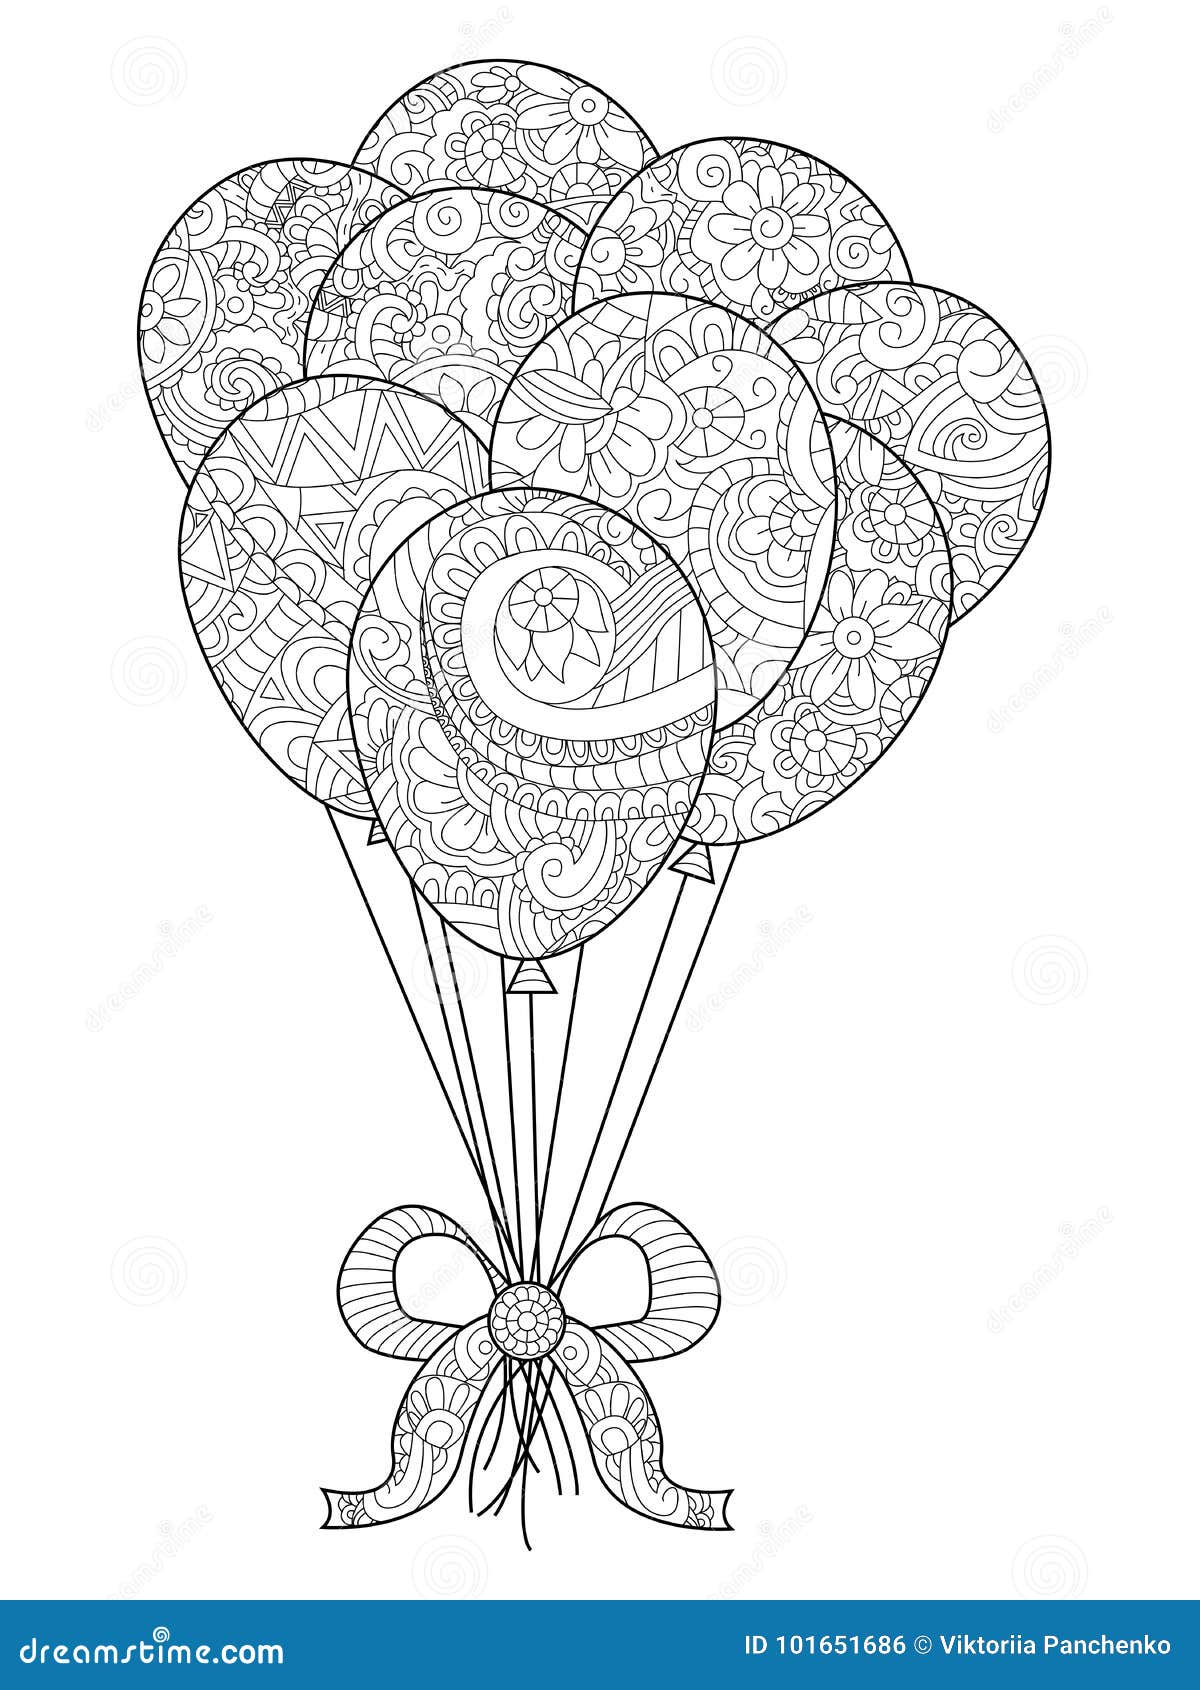 Download Group Of Balloons On A String Coloring Raster For Adults Stock Illustration - Illustration of ...